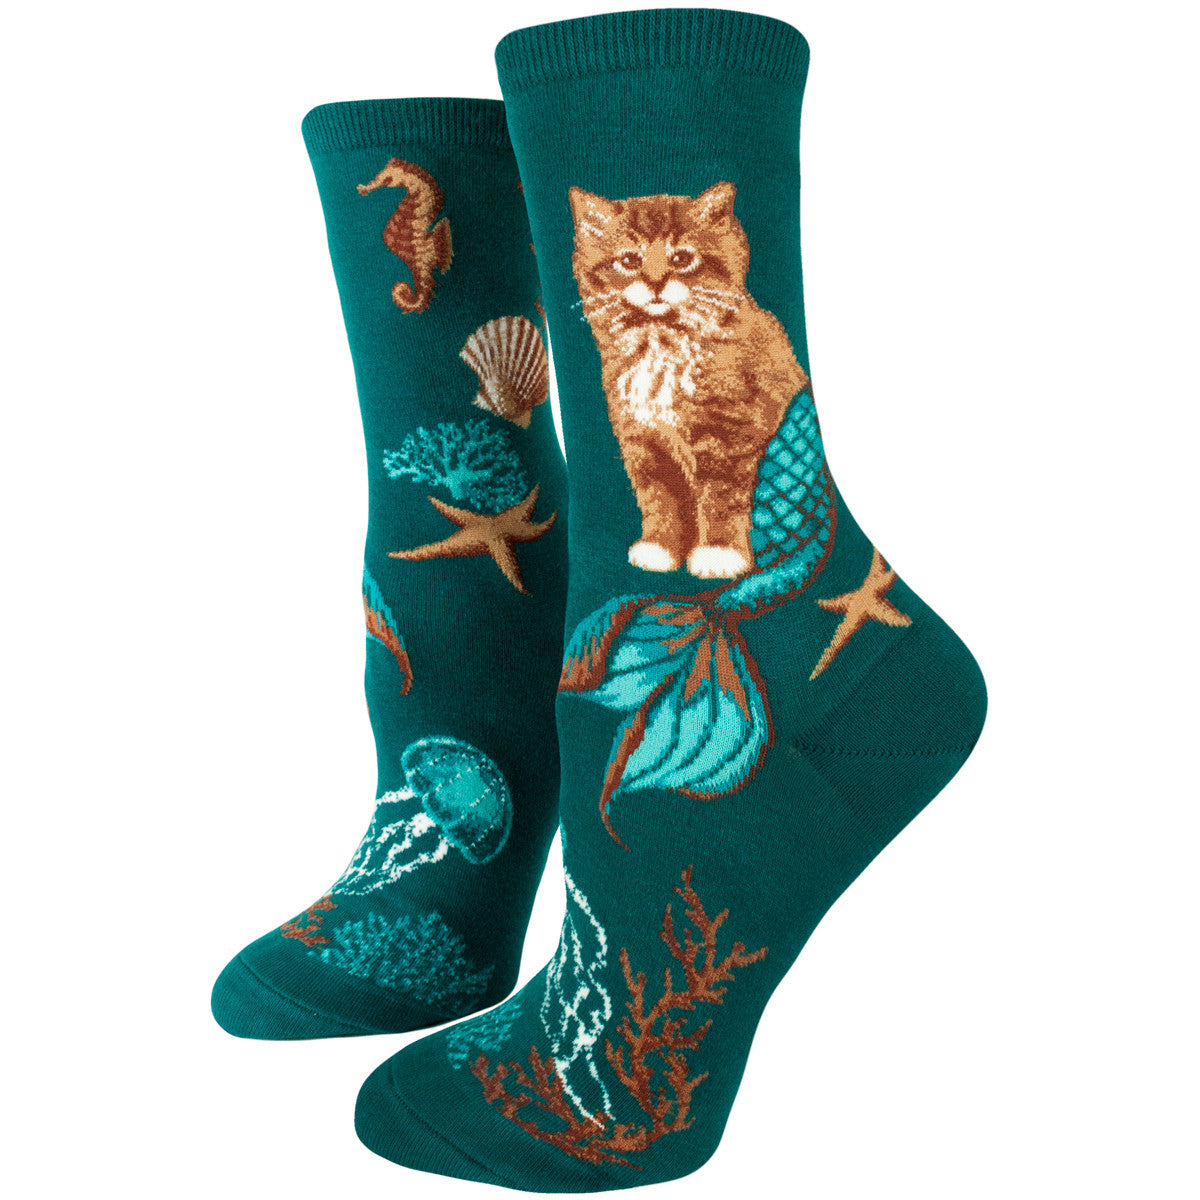 A cute sock if there ever was one, ModSocks' Purrmaid socks featuring cat mermaids are adorable!